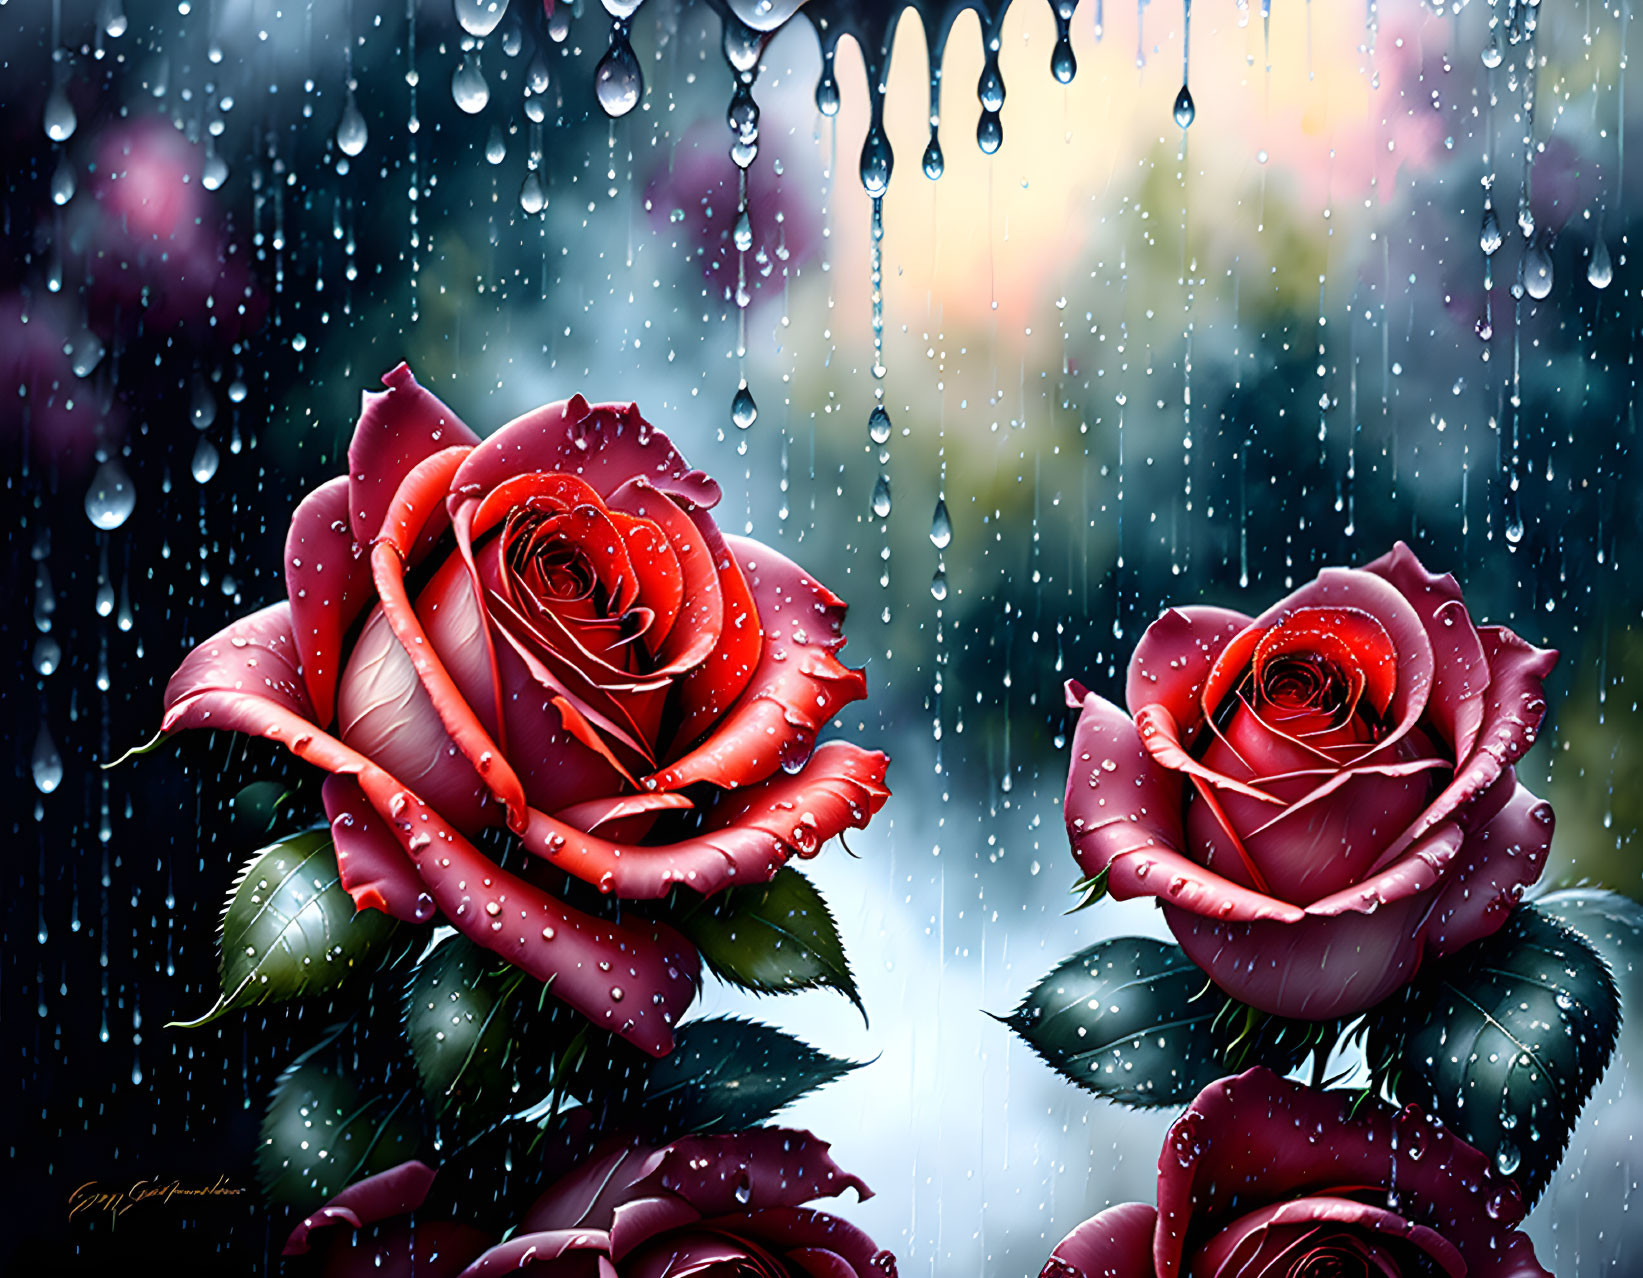 Bright Red Roses with Raindrops on Rainy Bokeh Background